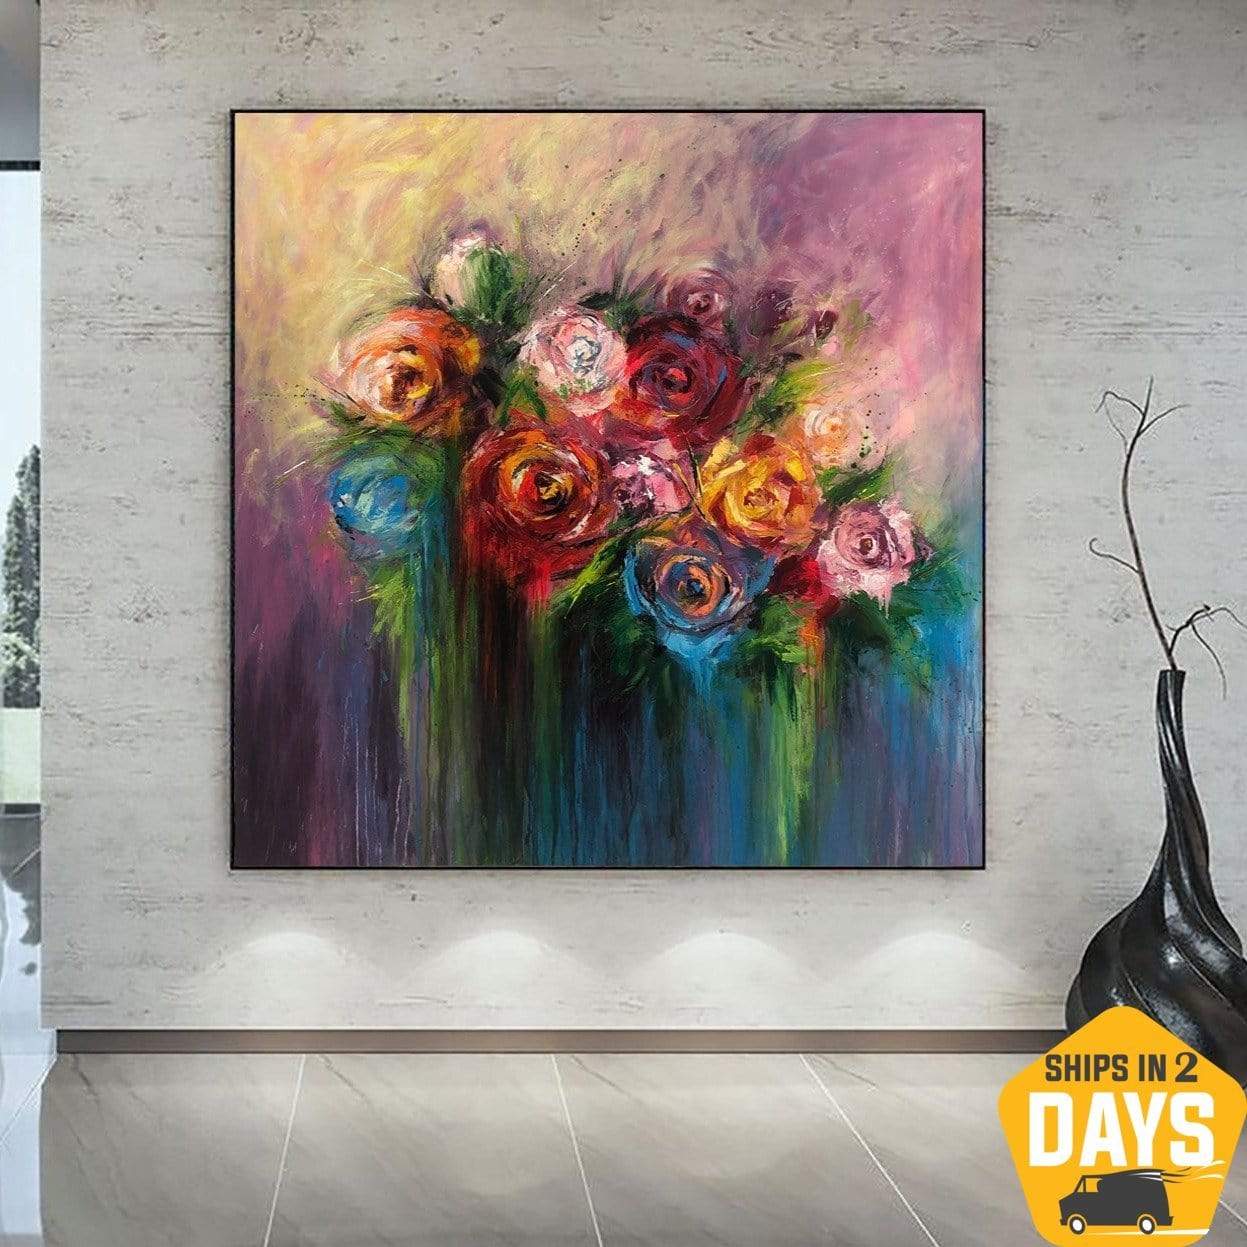 Vivid　Floral　Paintings　Abstract　On　Canvas　Original　A　Art　Trend　Art　Paintings　Great　Britain　–　Still　Flowers　Life　Gallery　Abstract　Oil　Trendgallery